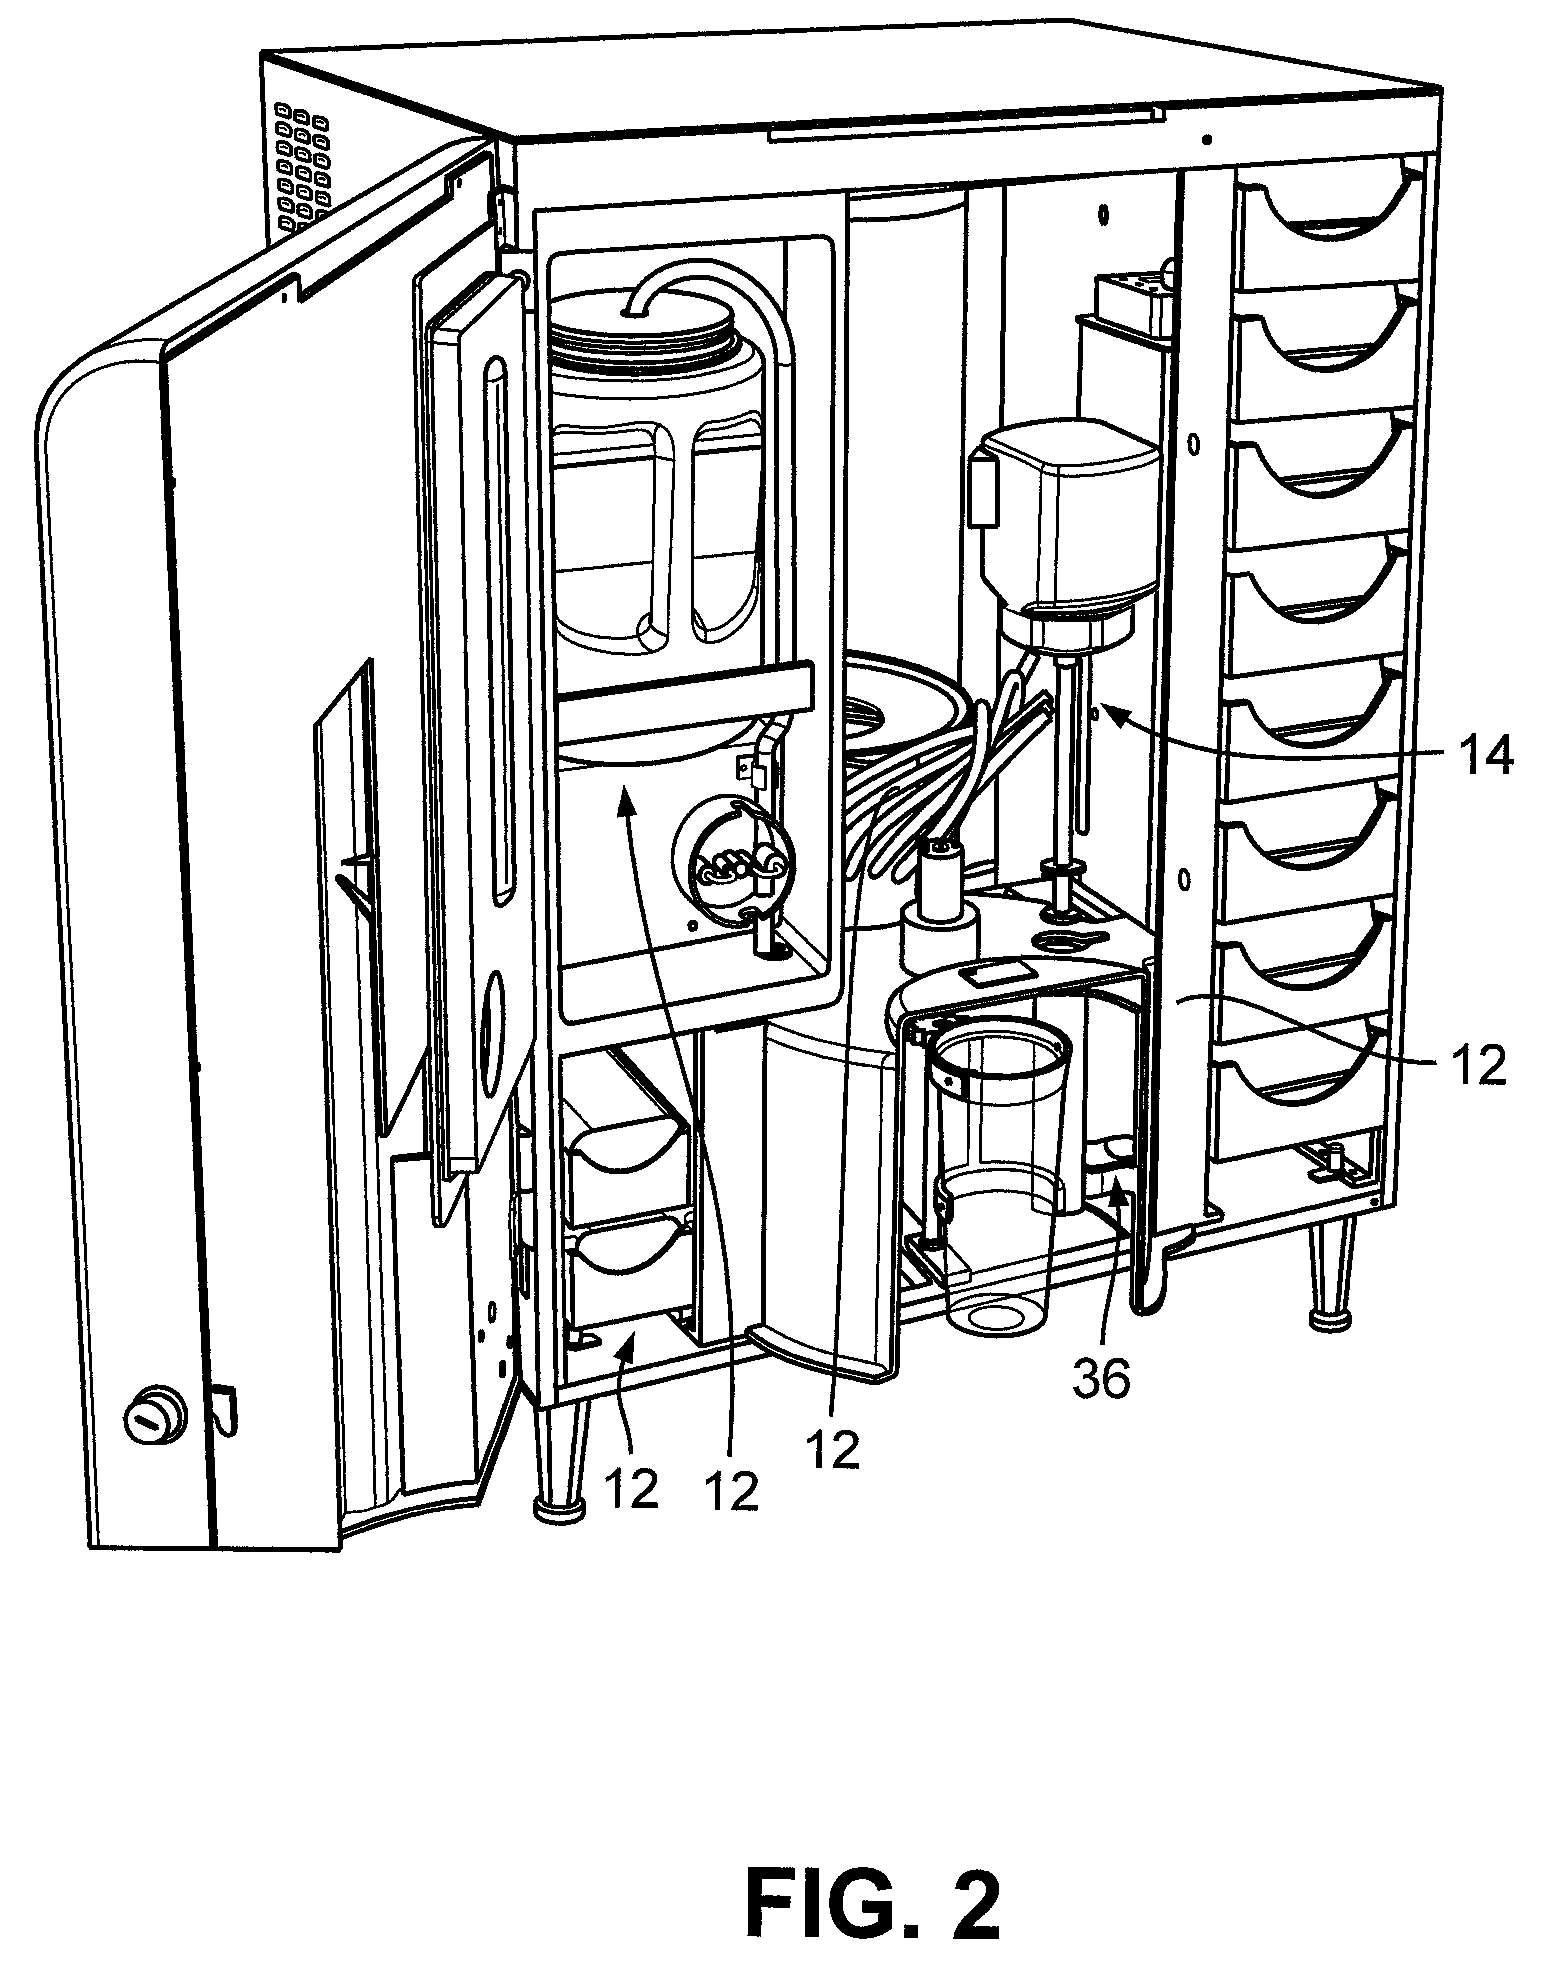 Apparatus and methods for producing beverages